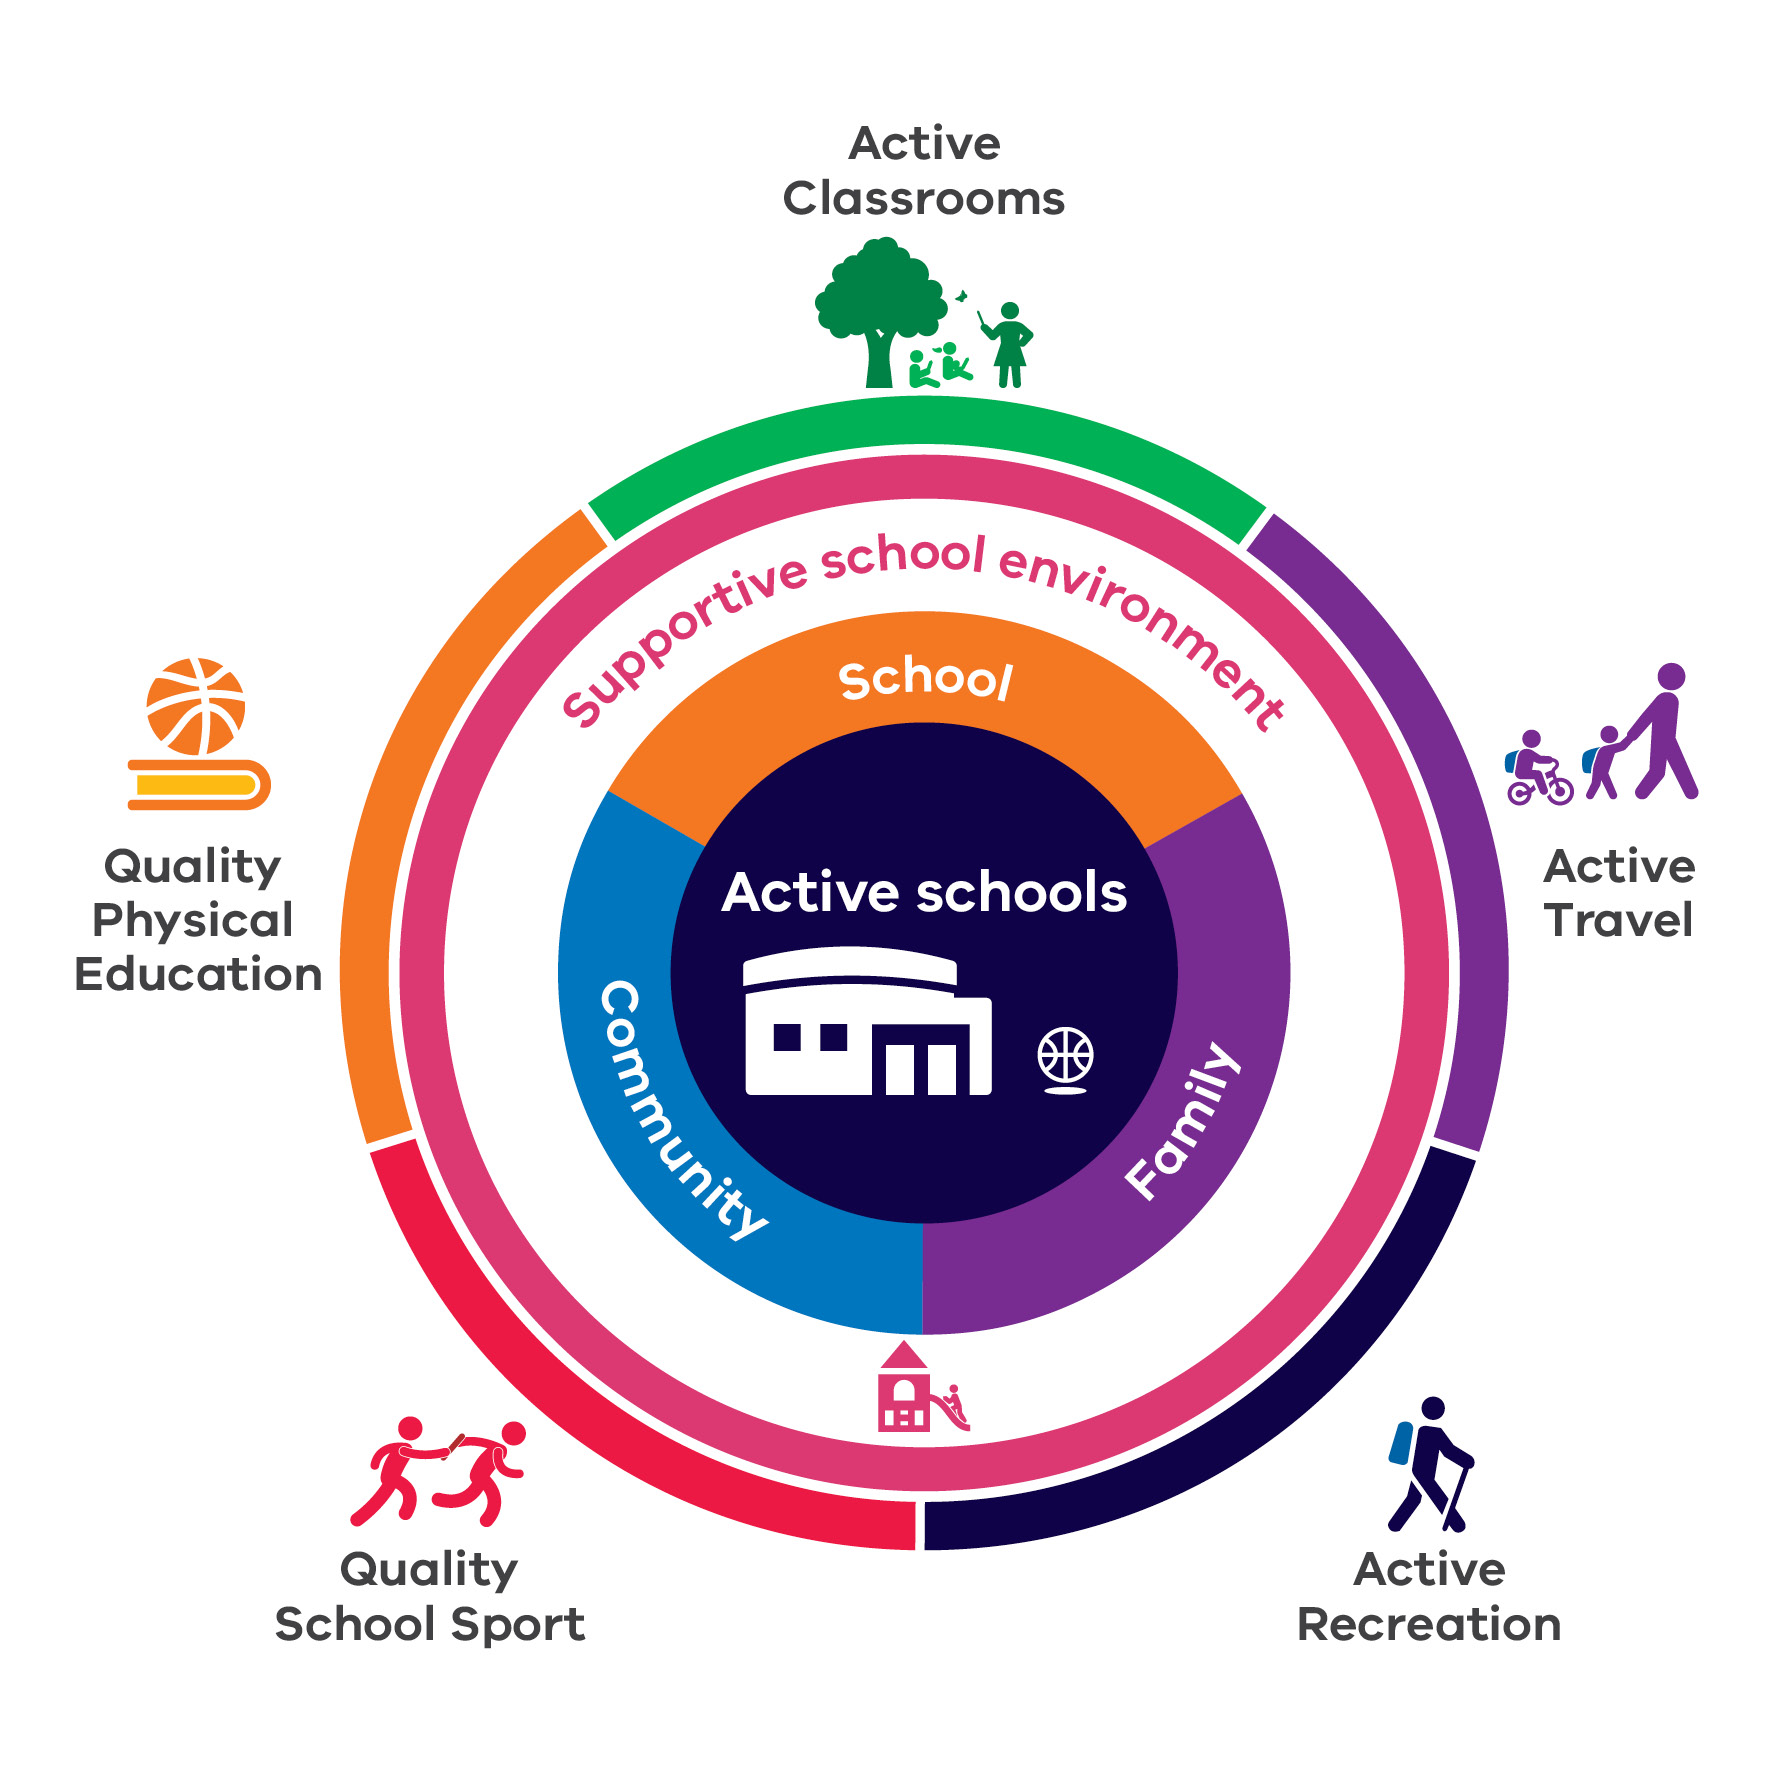 The active schools framework shows an active school surrounded by the support of school staff, family and the community. This cooperation creates a supportive school environment which is essential to deliver the priority areas of: quality physical education, quality school sport, active classrooms, active travela and active recreation